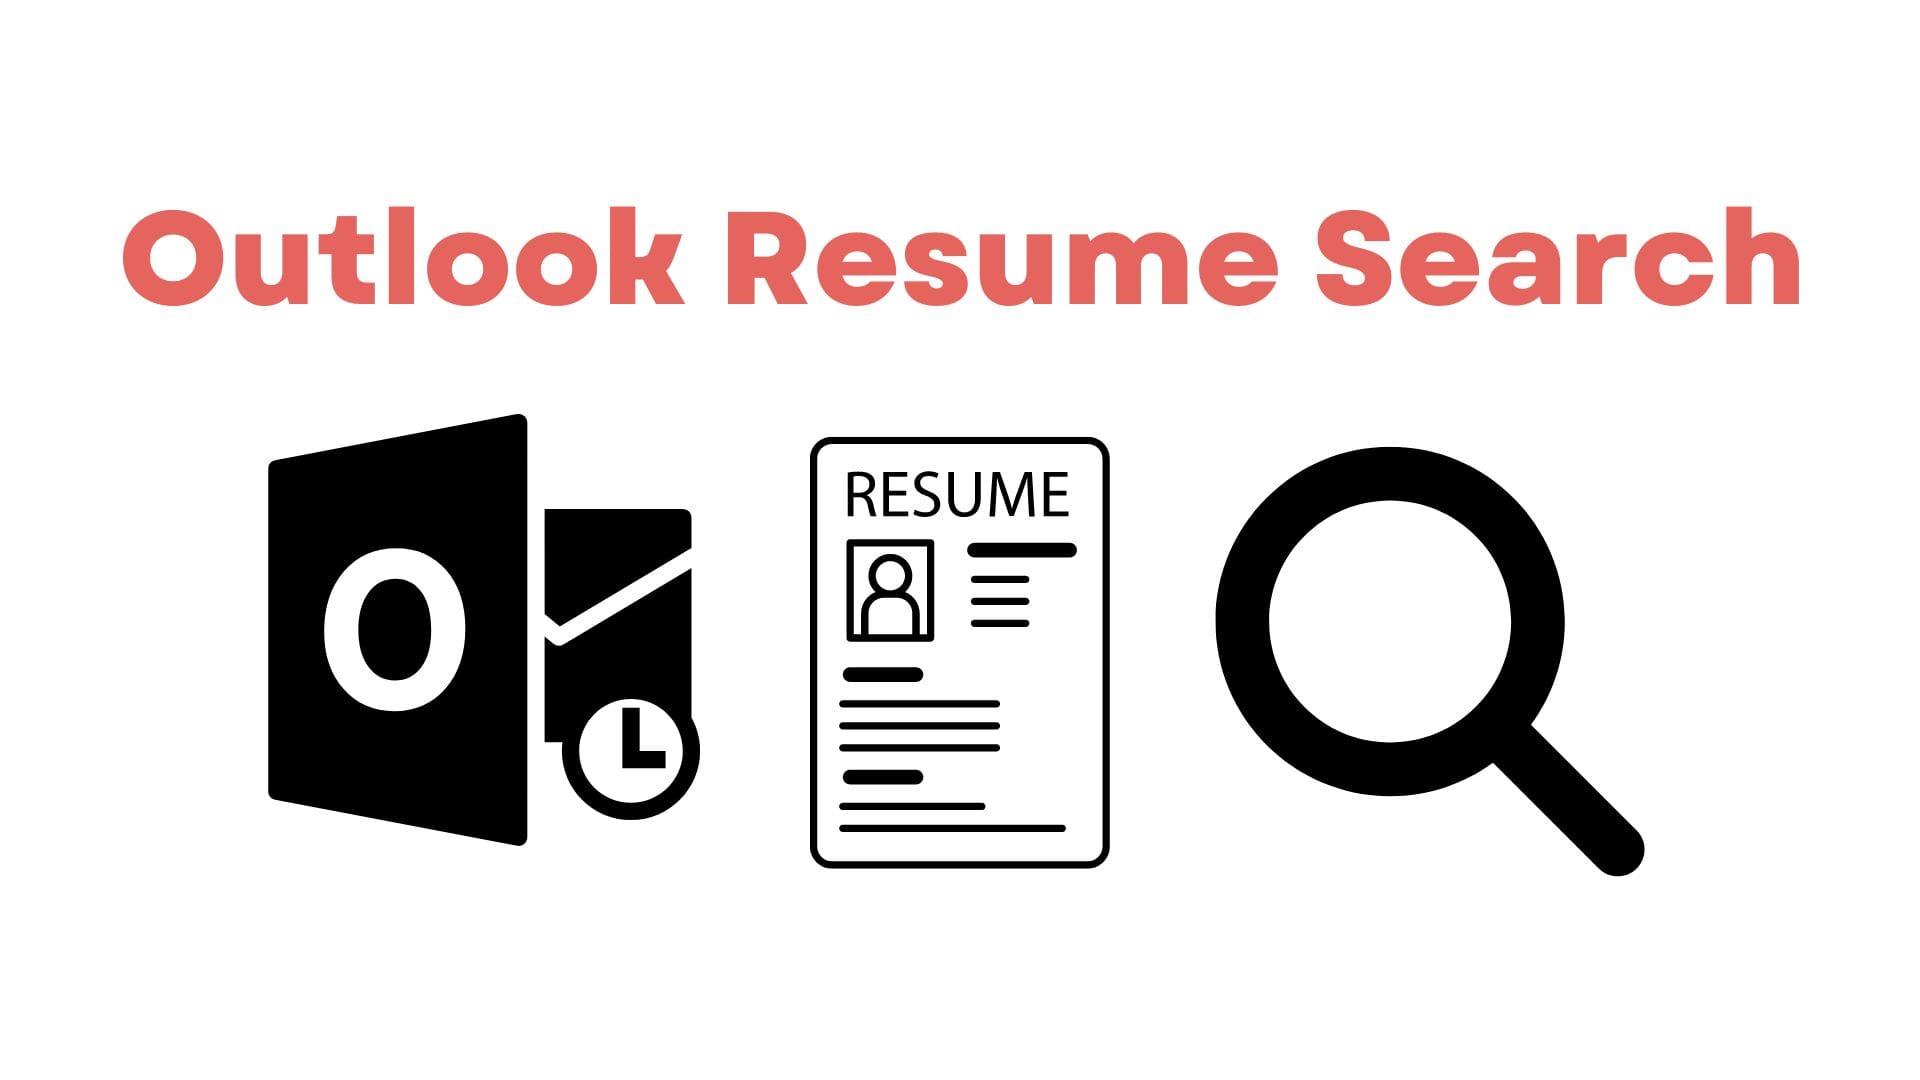 Outlook Resume Search